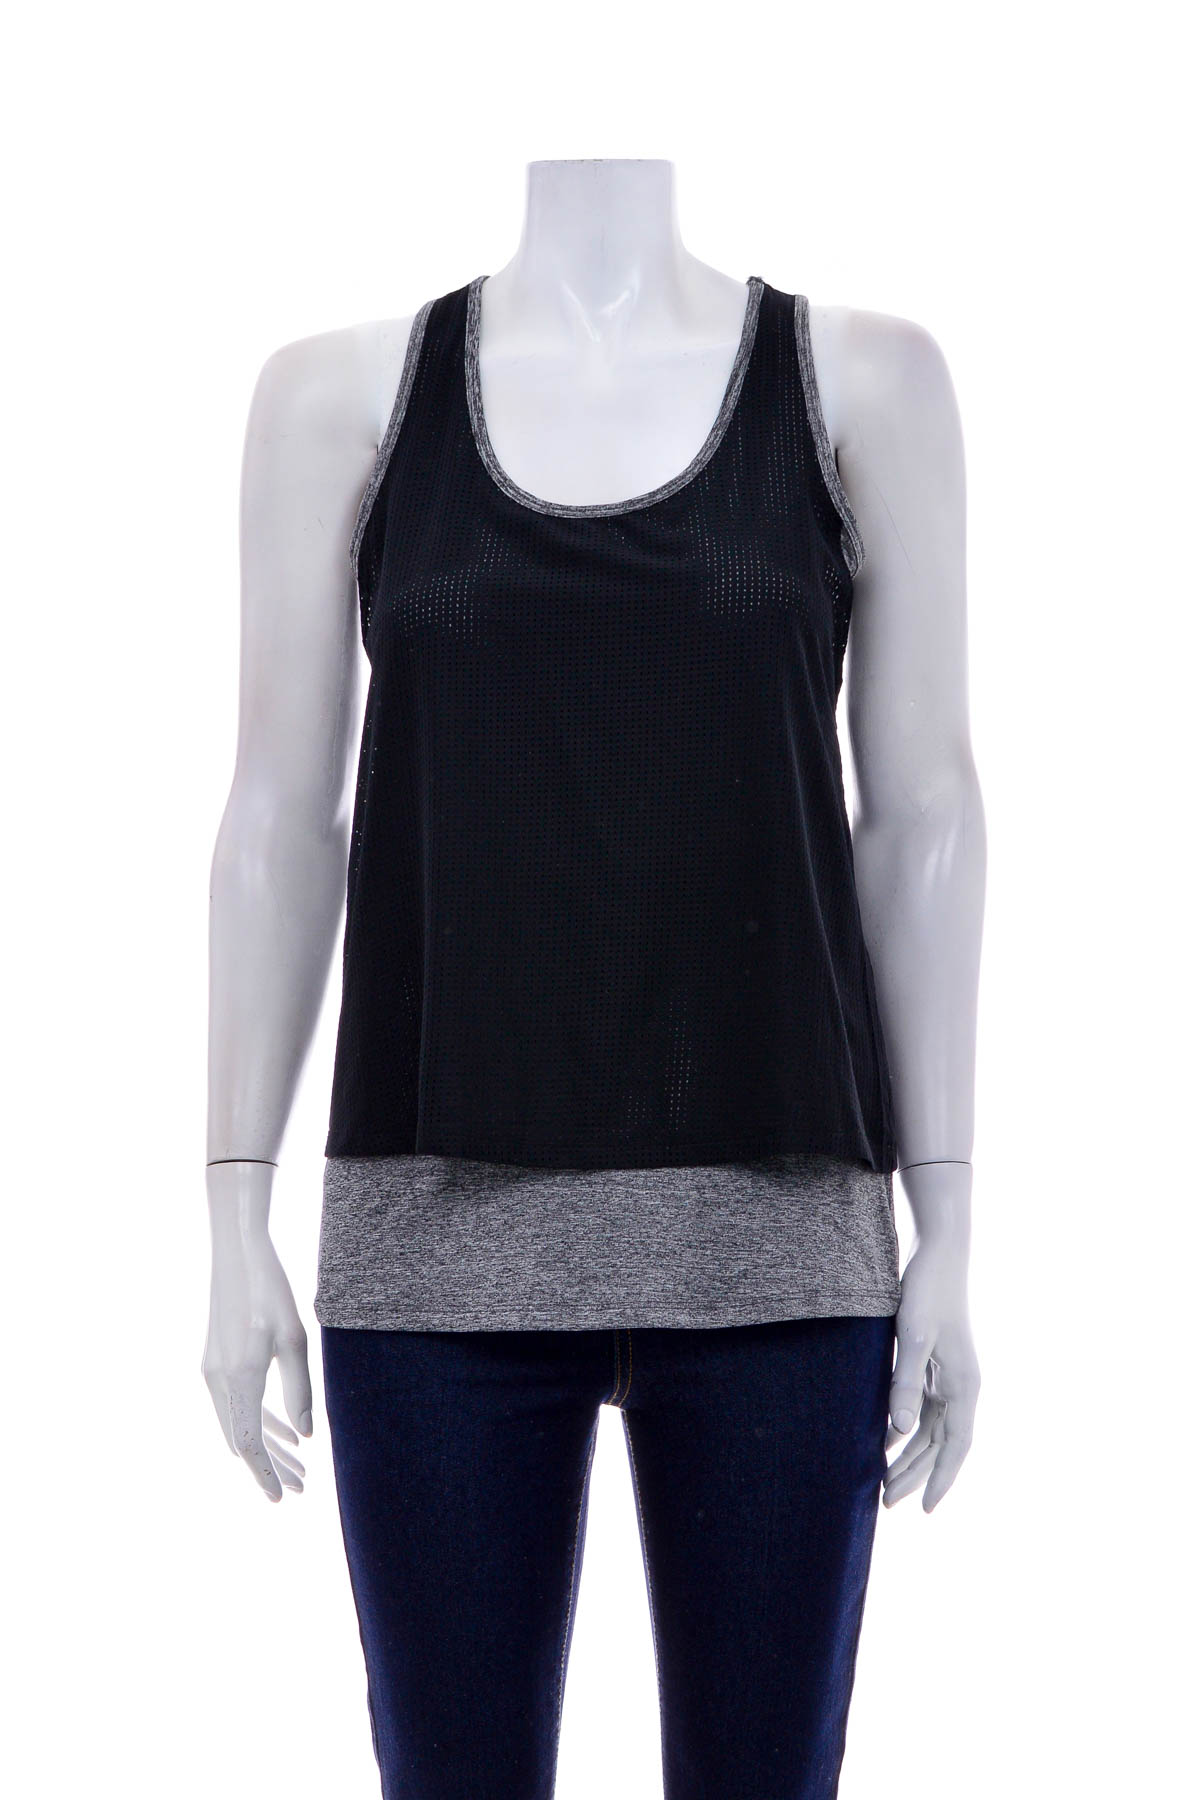 Women's top - Active LIMITED by Tchibo - 0